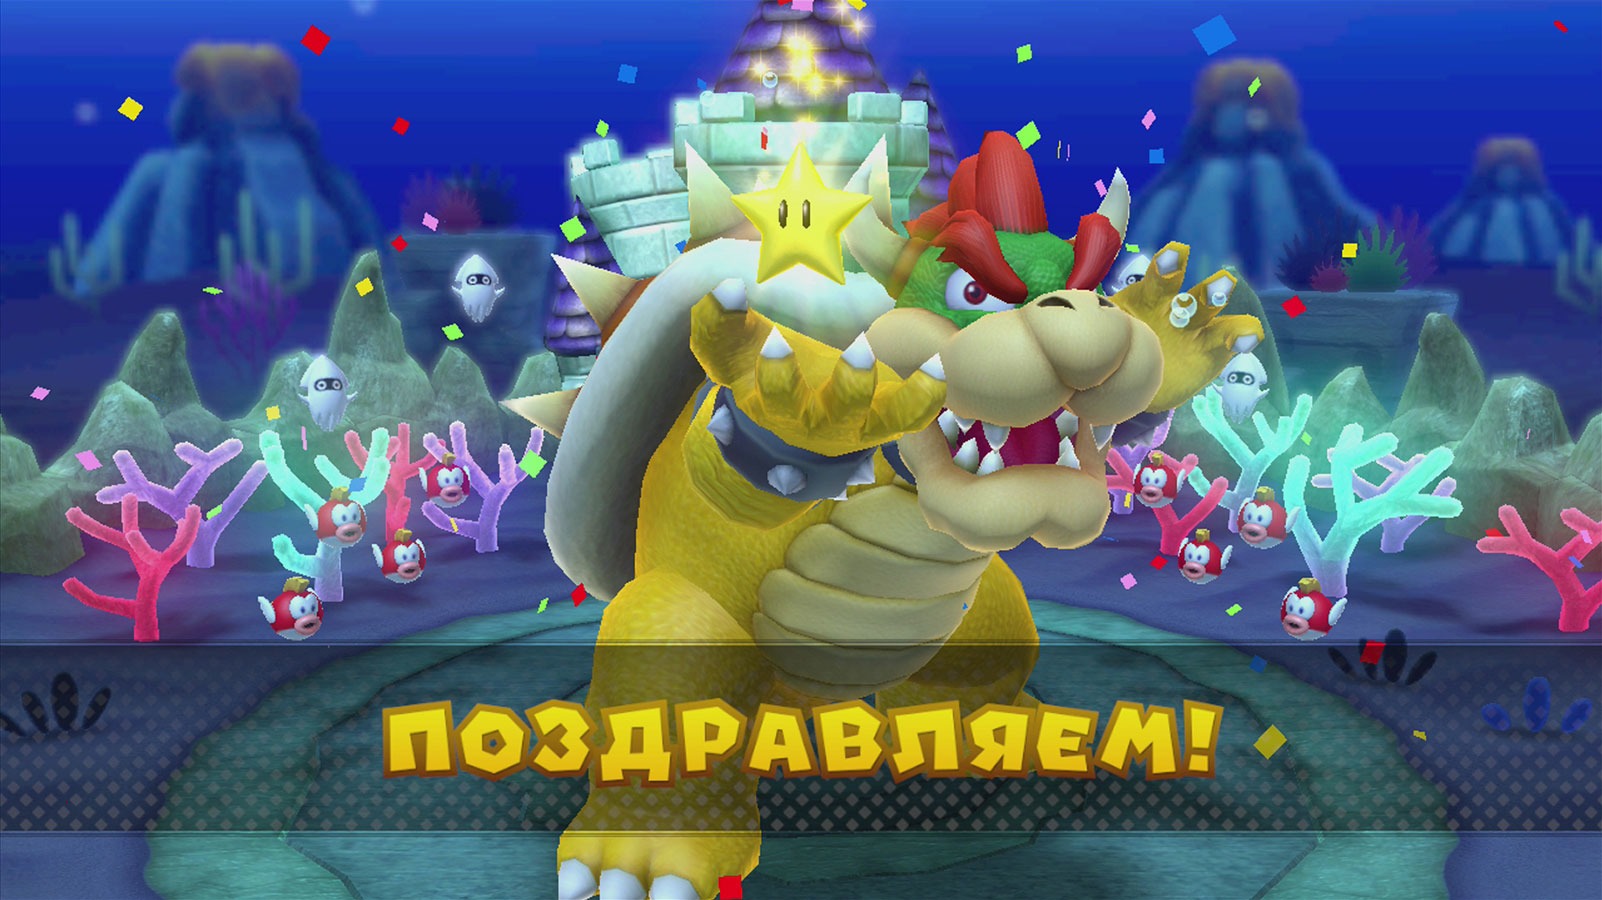 Super mario party by minus8 full. Mario Party 10. Mario Party 3. Mario Party 10 Wii u. Mario Party 10 all Bosses.